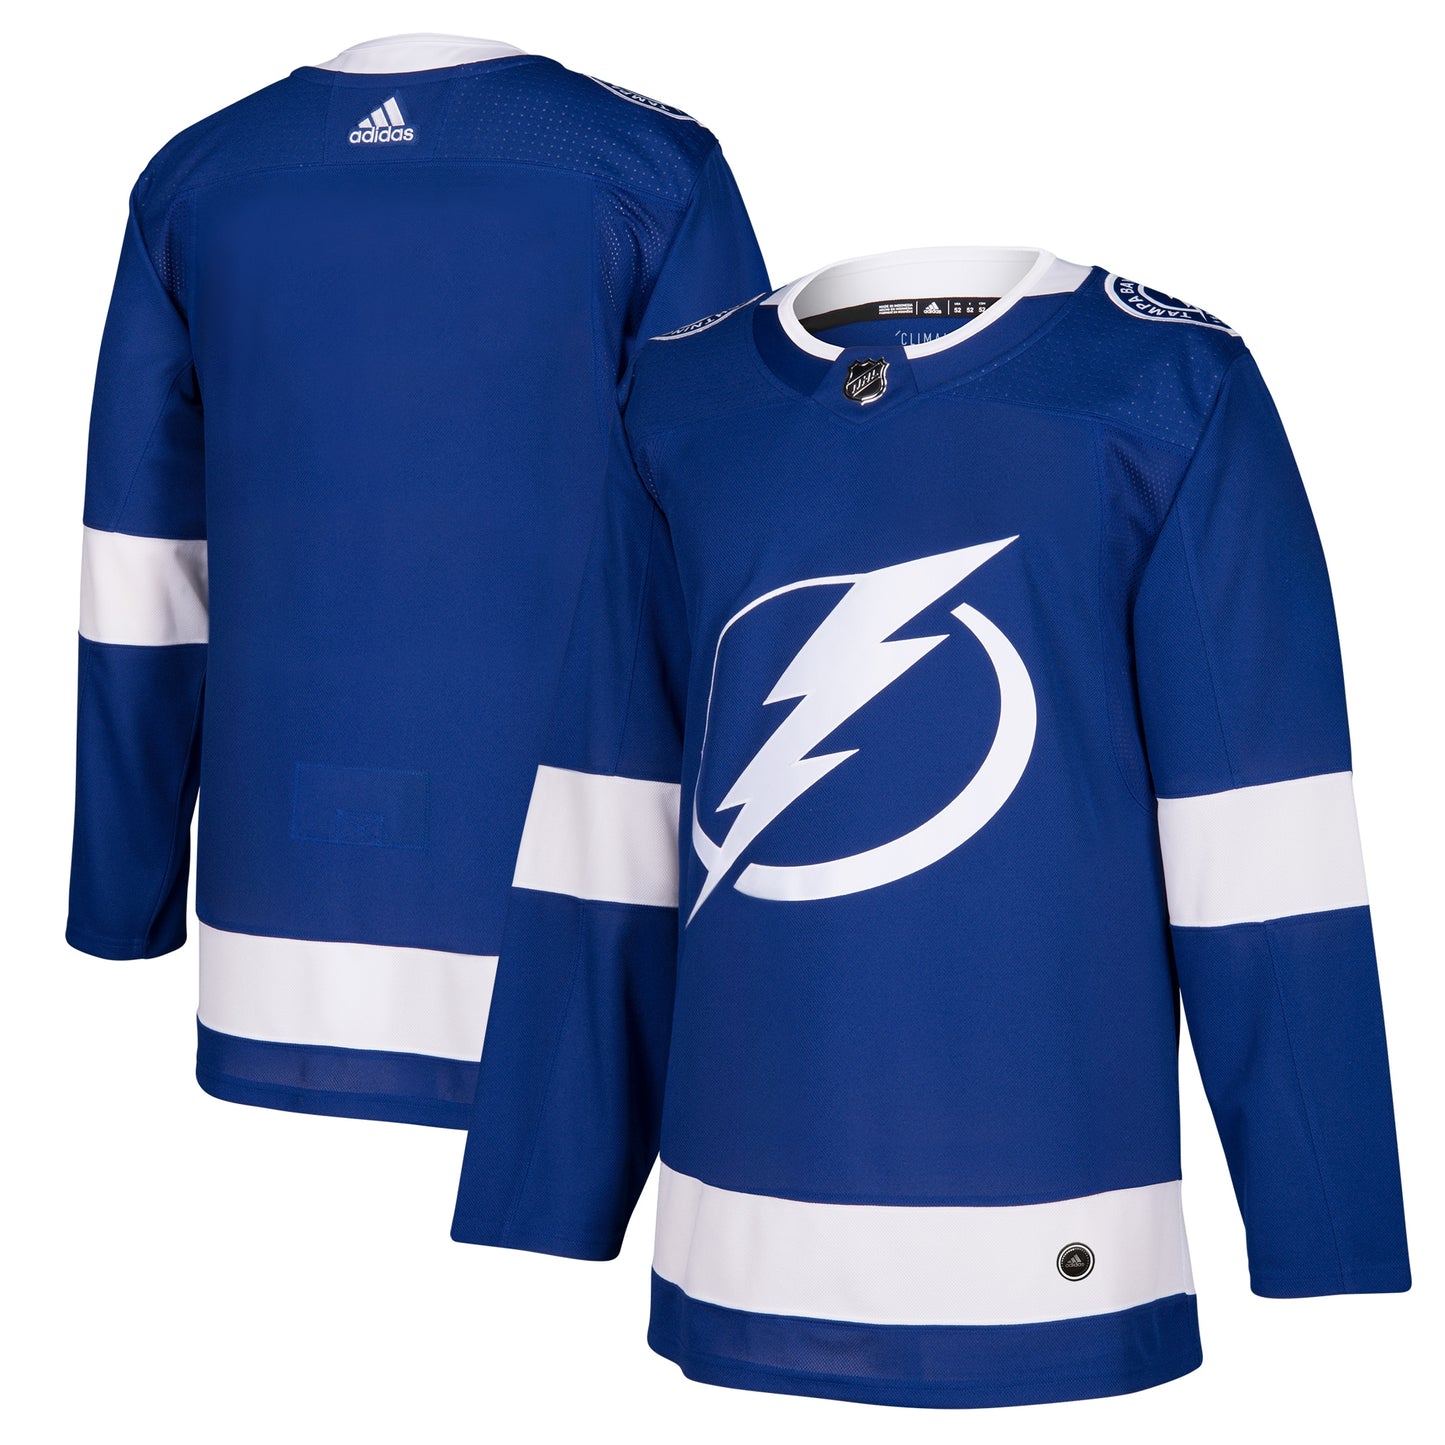 Tampa Bay Lightning adidas Home Authentic Blank Jersey - Blue